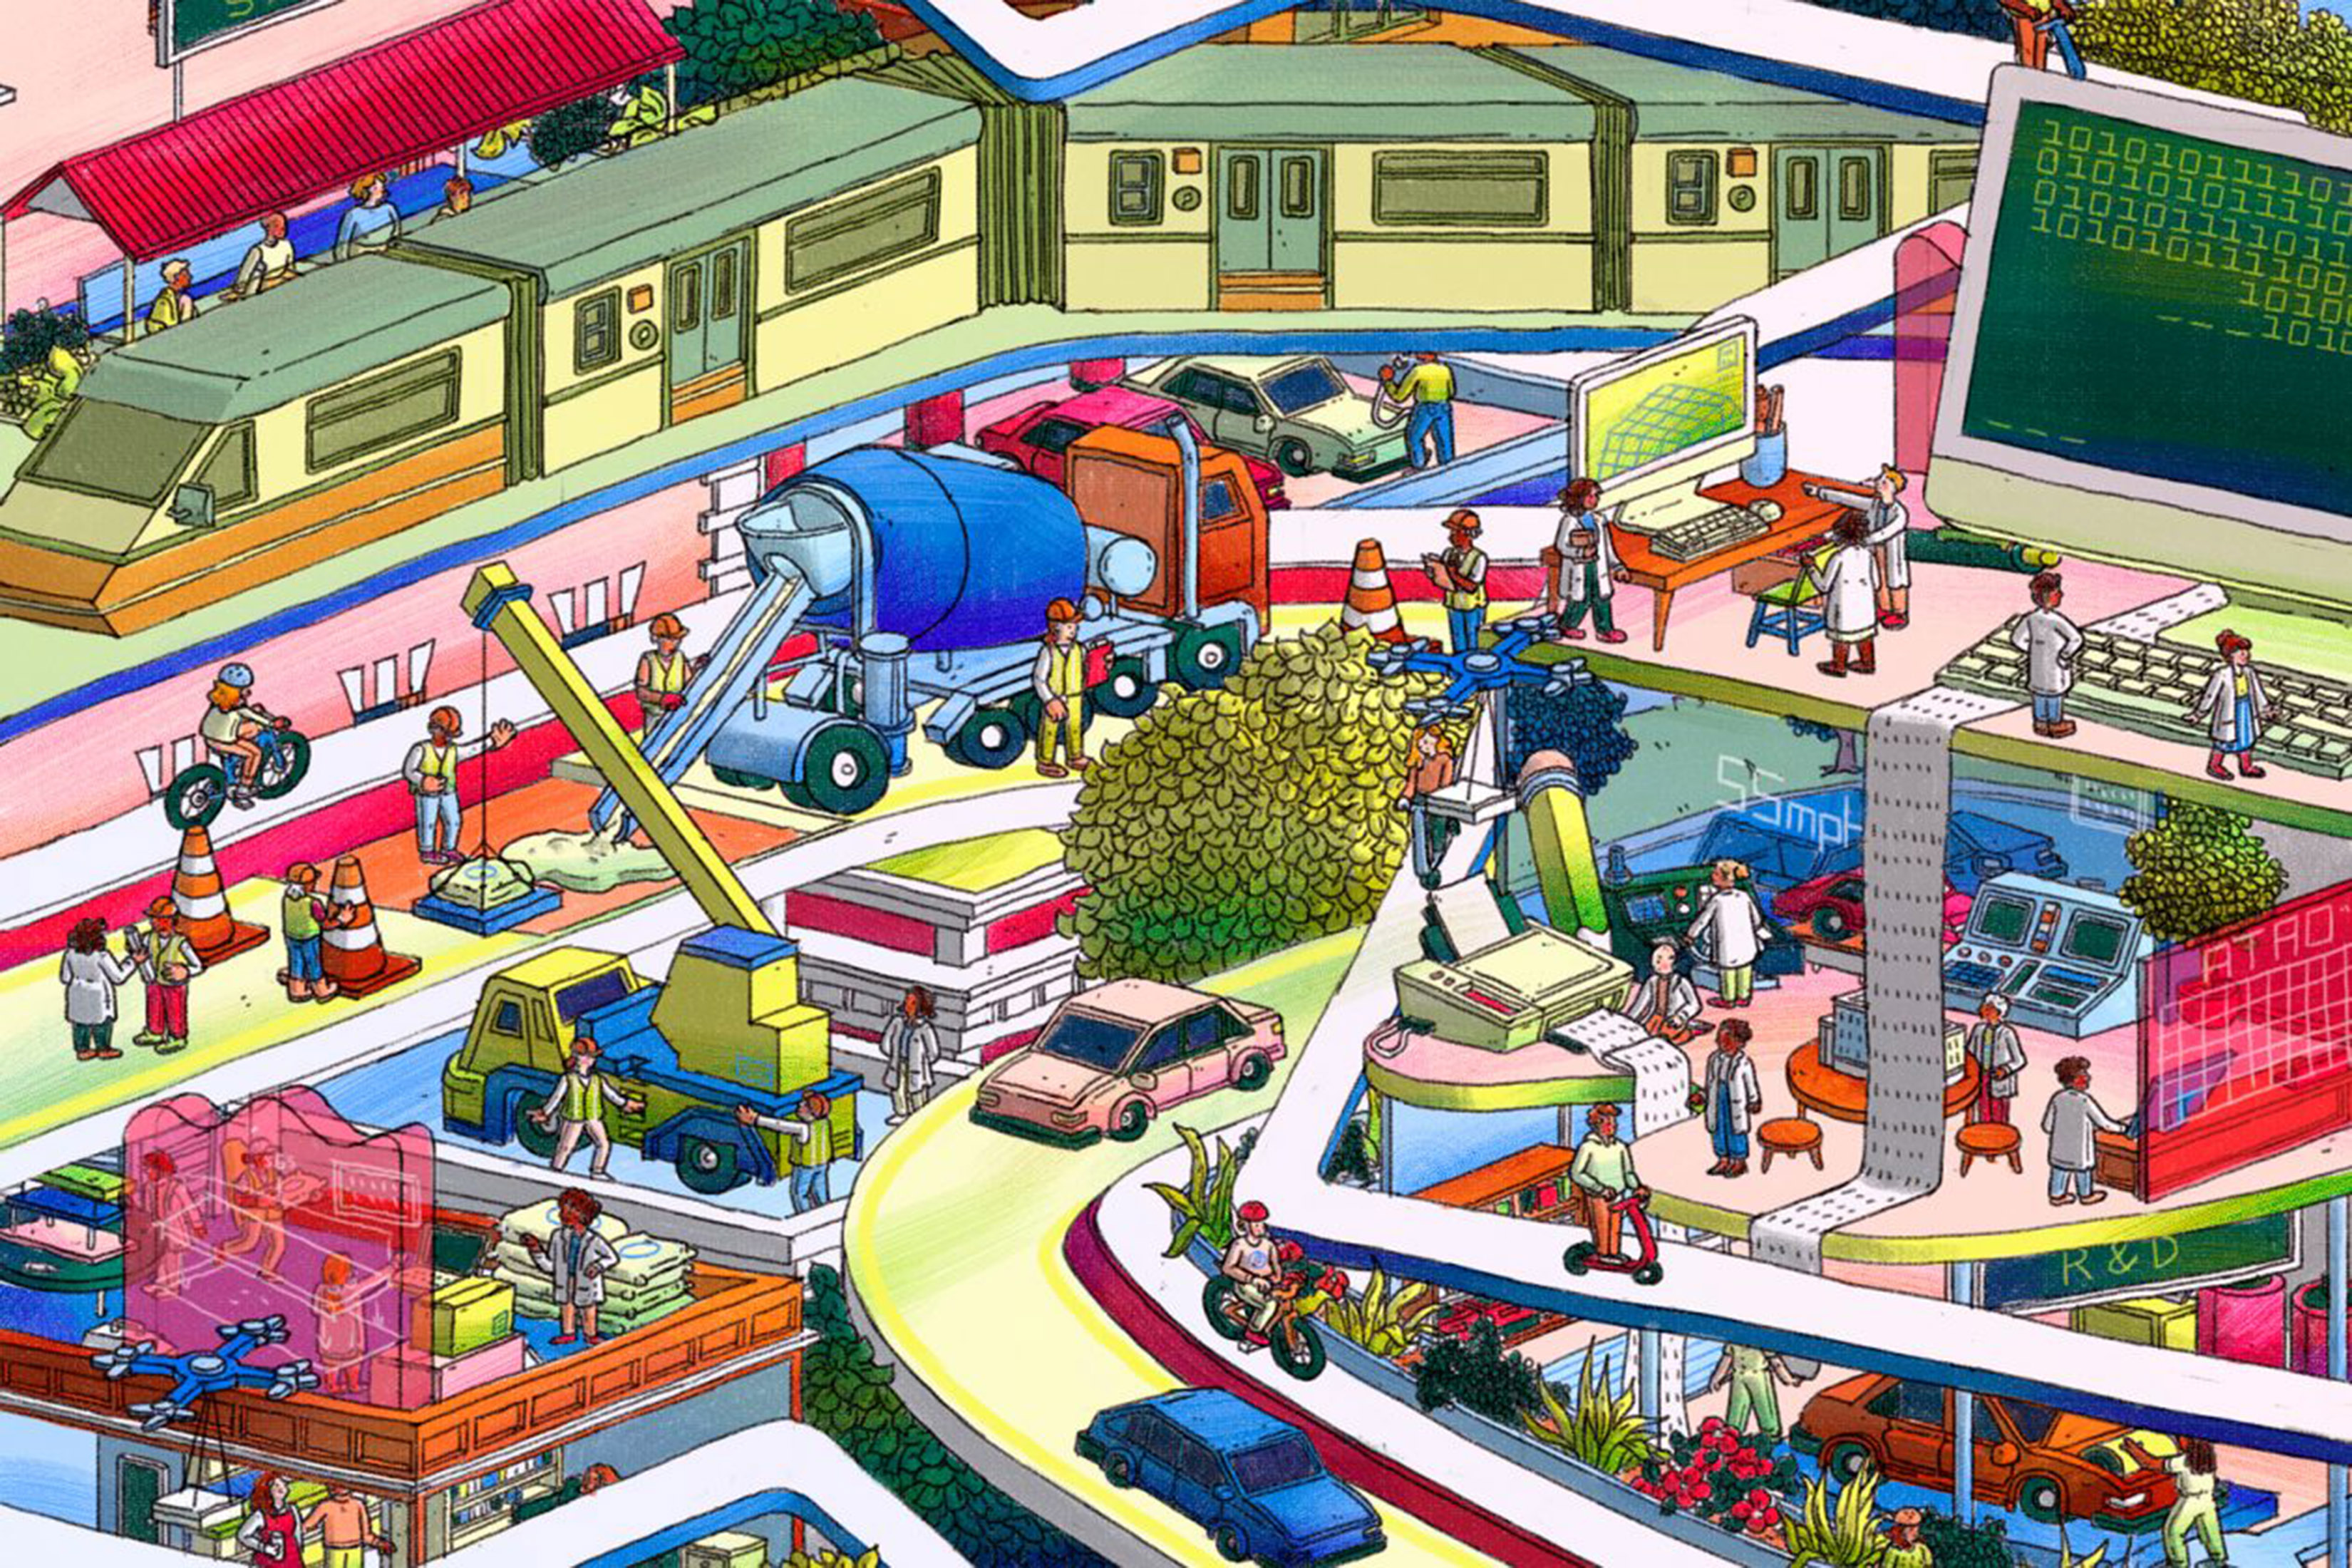 Illustration shows a busy array of real and unreal scenes, including a train, a drone, a cement mixer, cars, computers bigger than people, and intersecting roads.